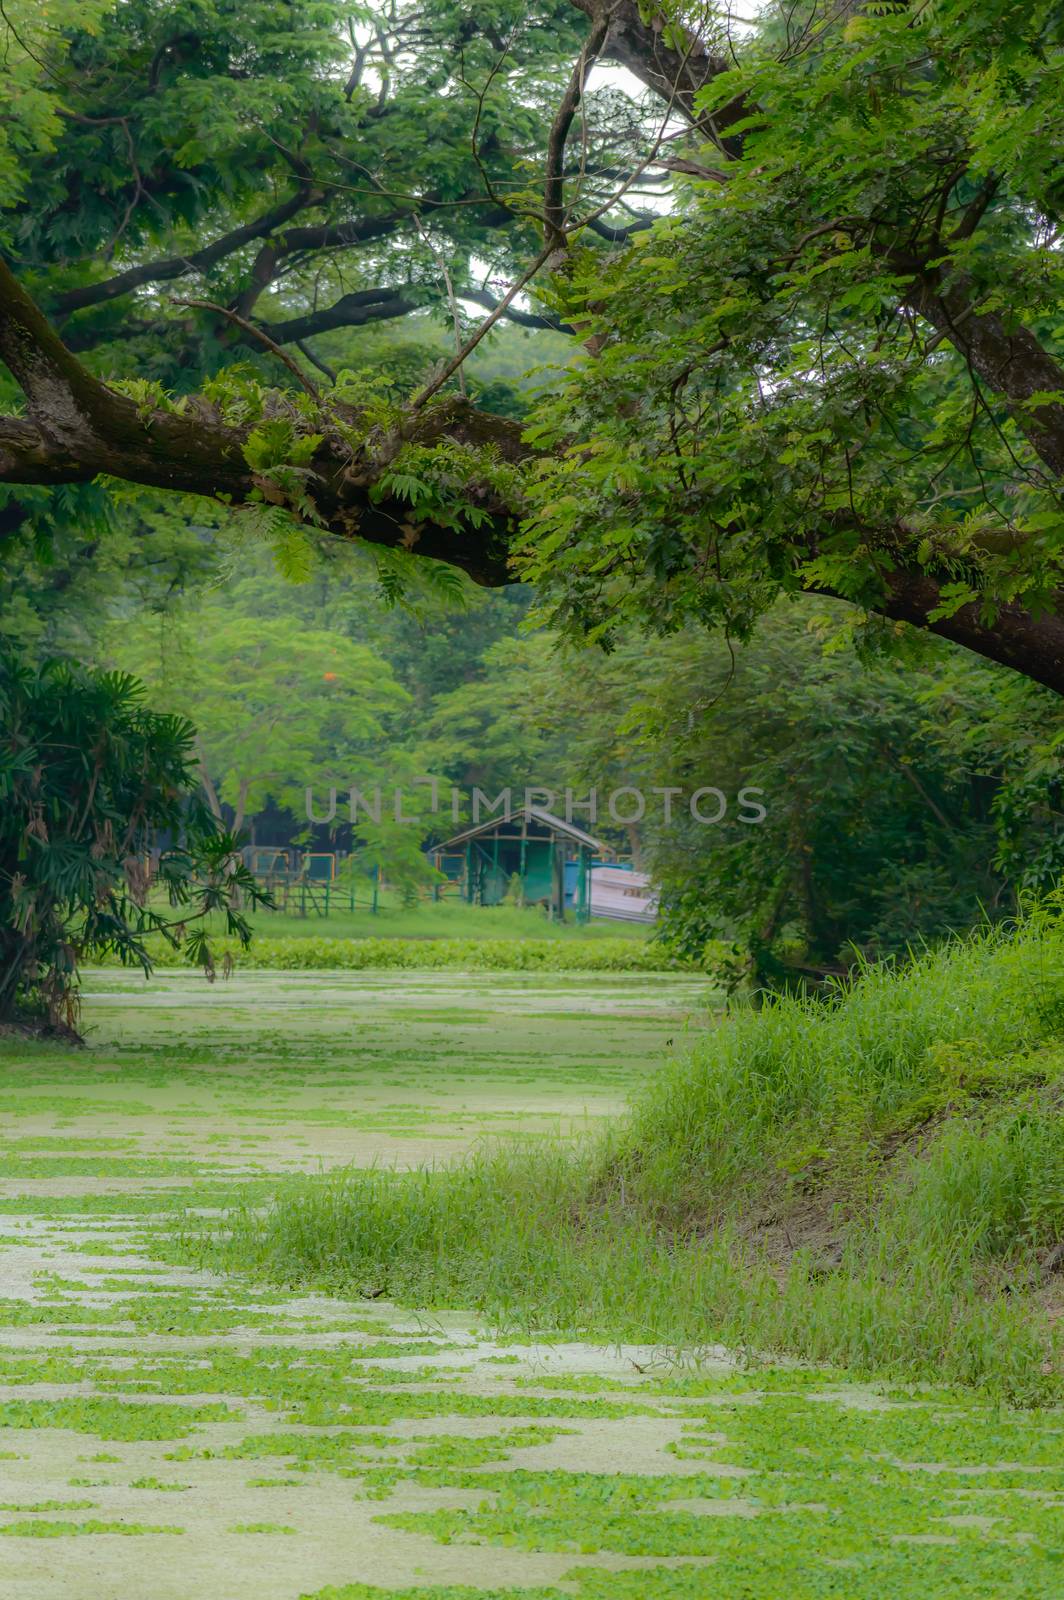 The house is surrounded by plants and trees. View on holiday cabin by a lake. Tiny house near the water. Vacation holiday concept. Goa India.